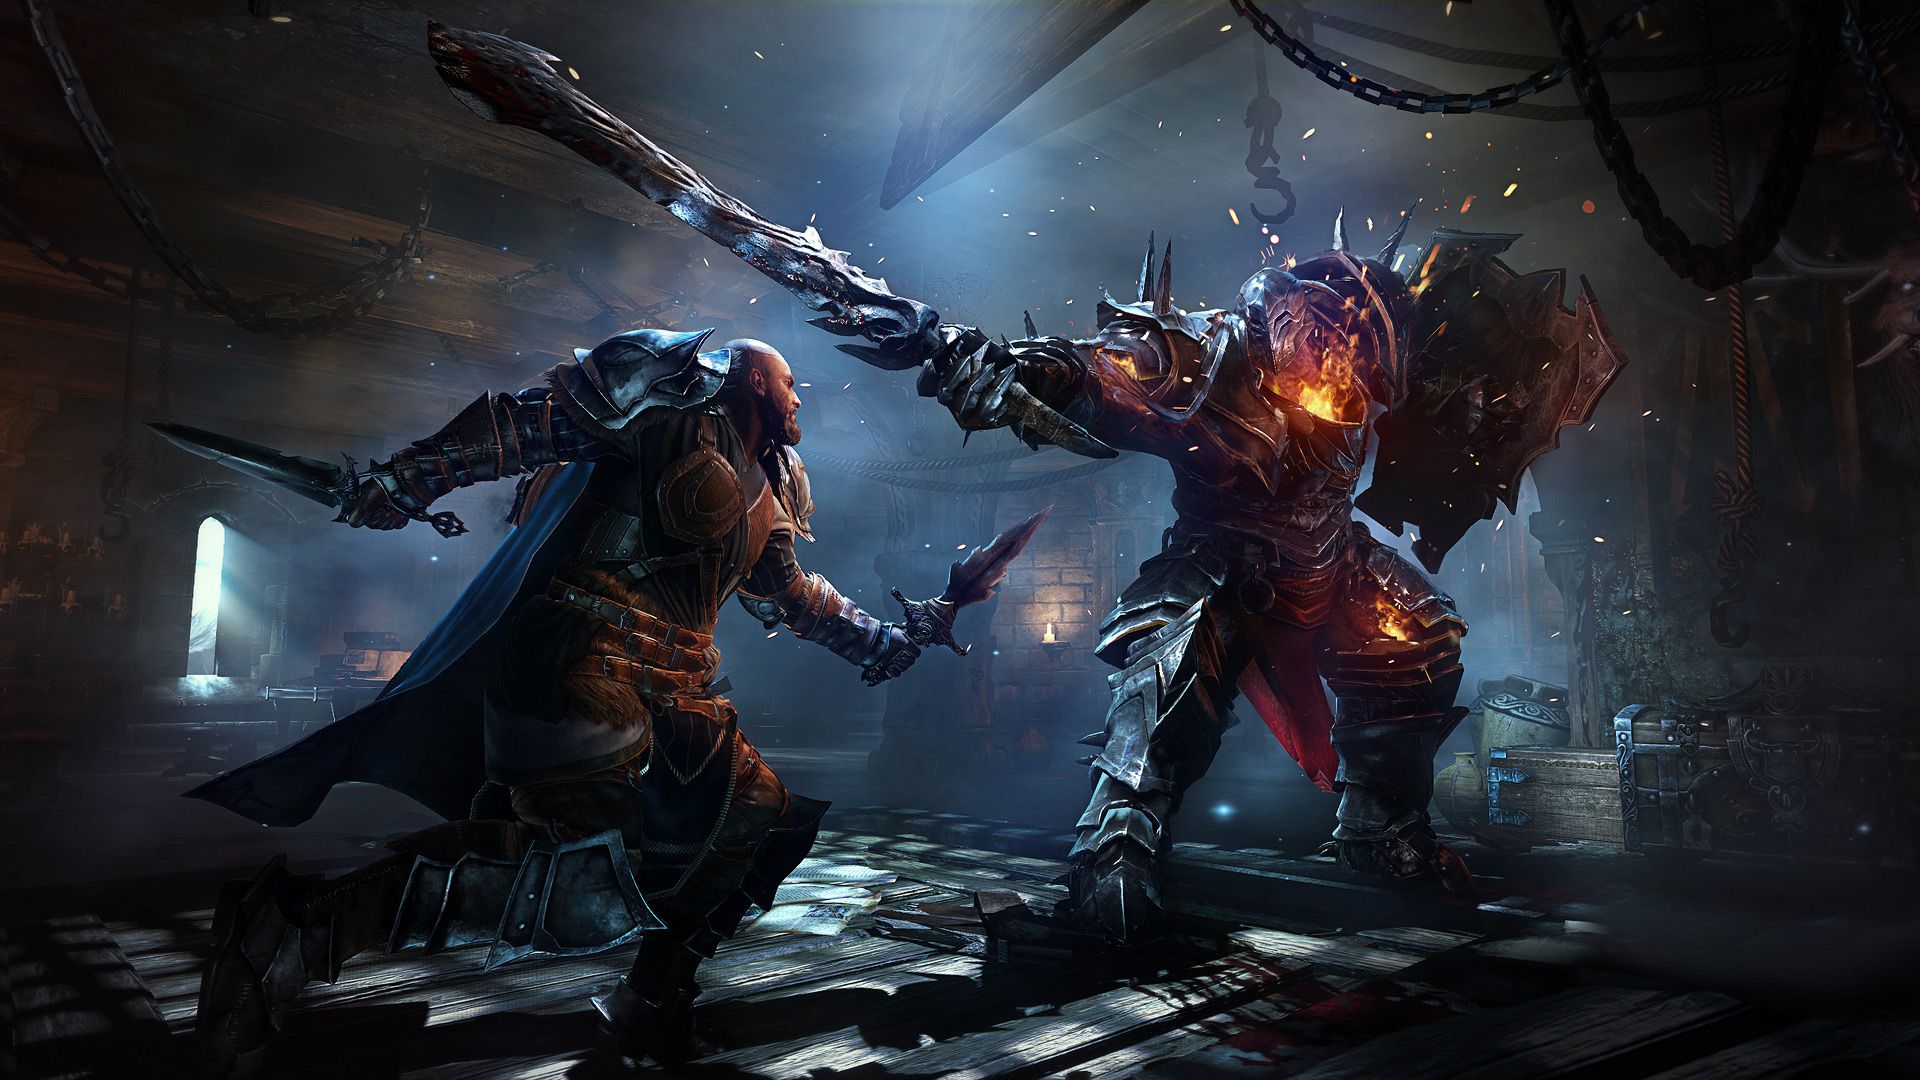 Lords of the Fallen - Official Launch Trailer 